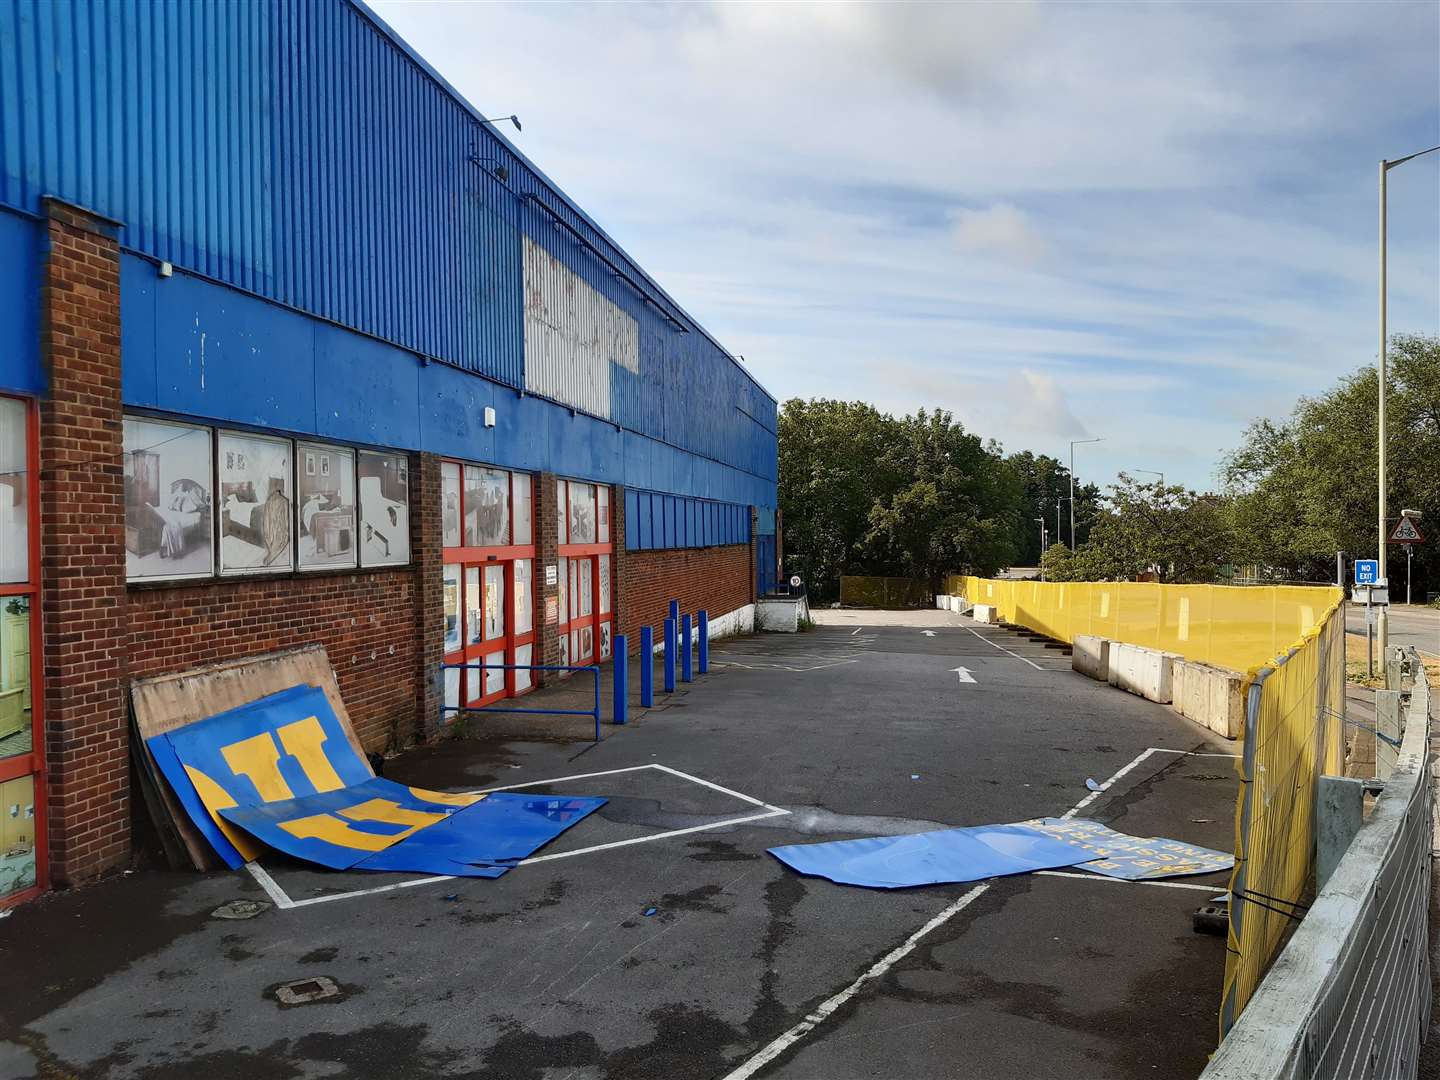 The ex-HomePlus site has now been cordoned off ahead of demolition to make way for the 'Ashford Shard' scheme